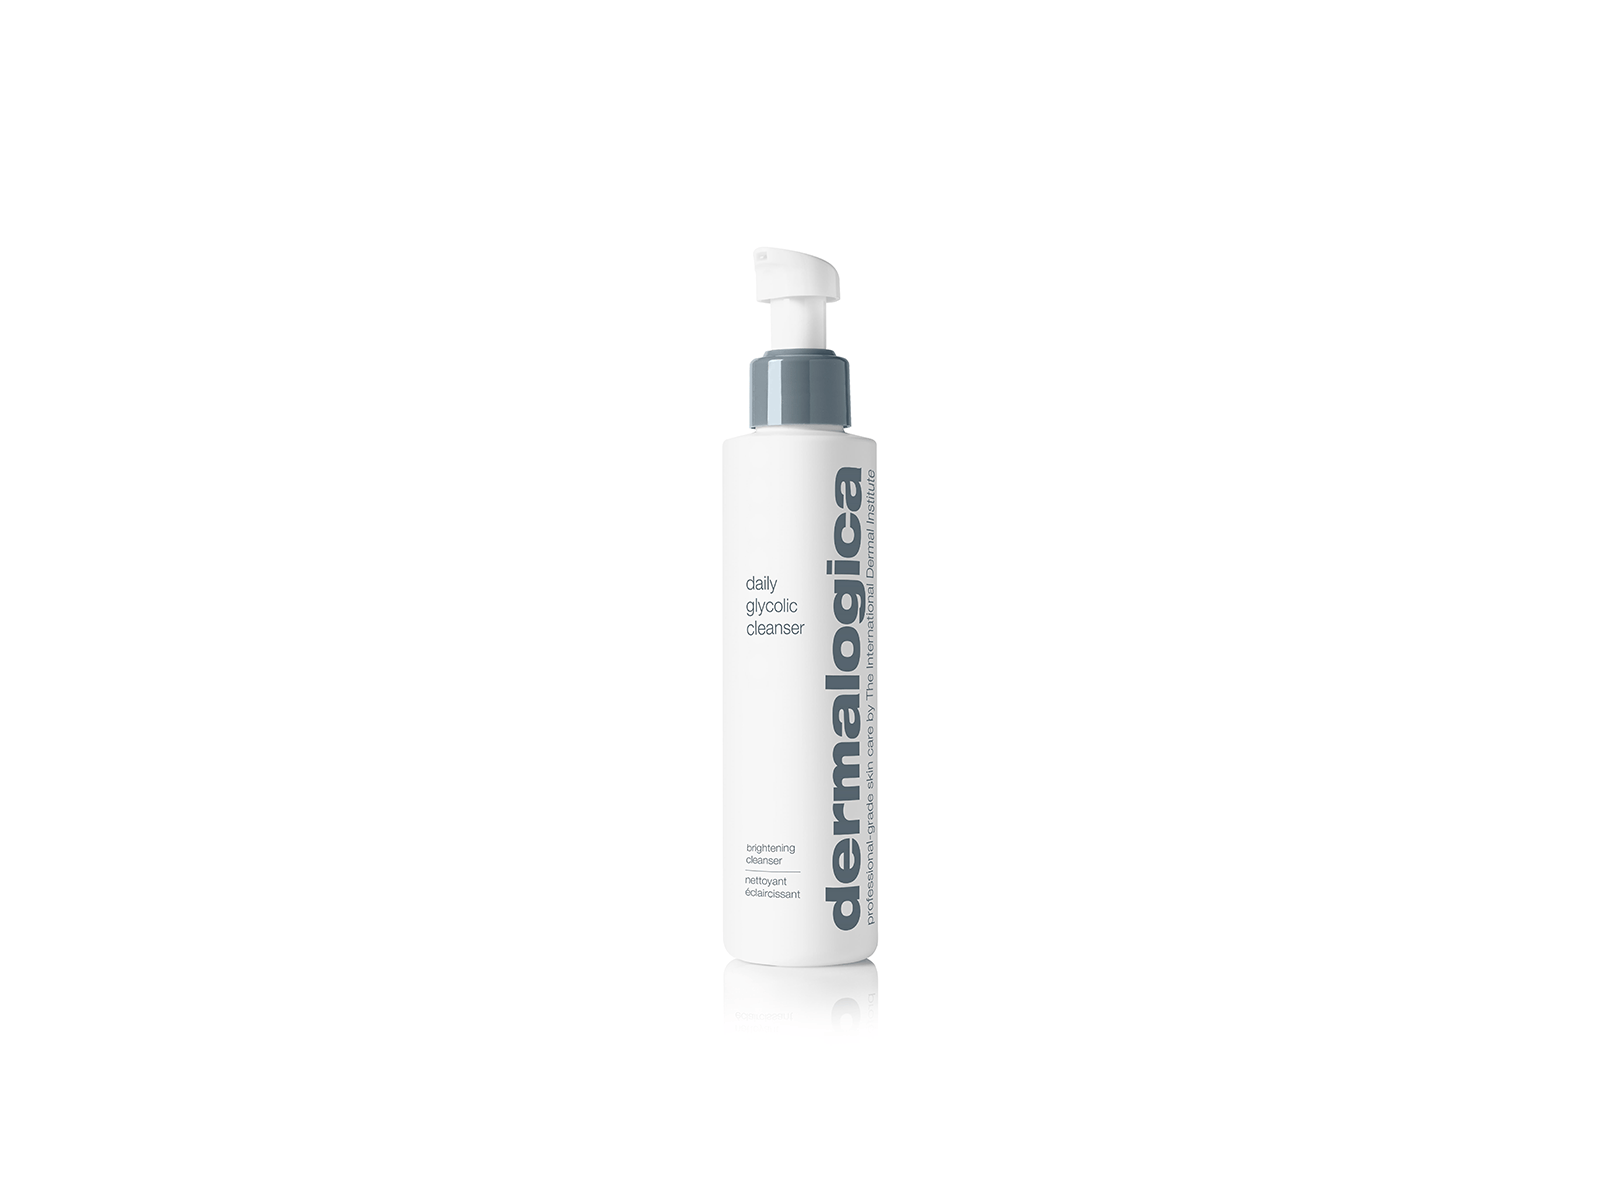 Dermalogica Daily Glycolic Cleanser.